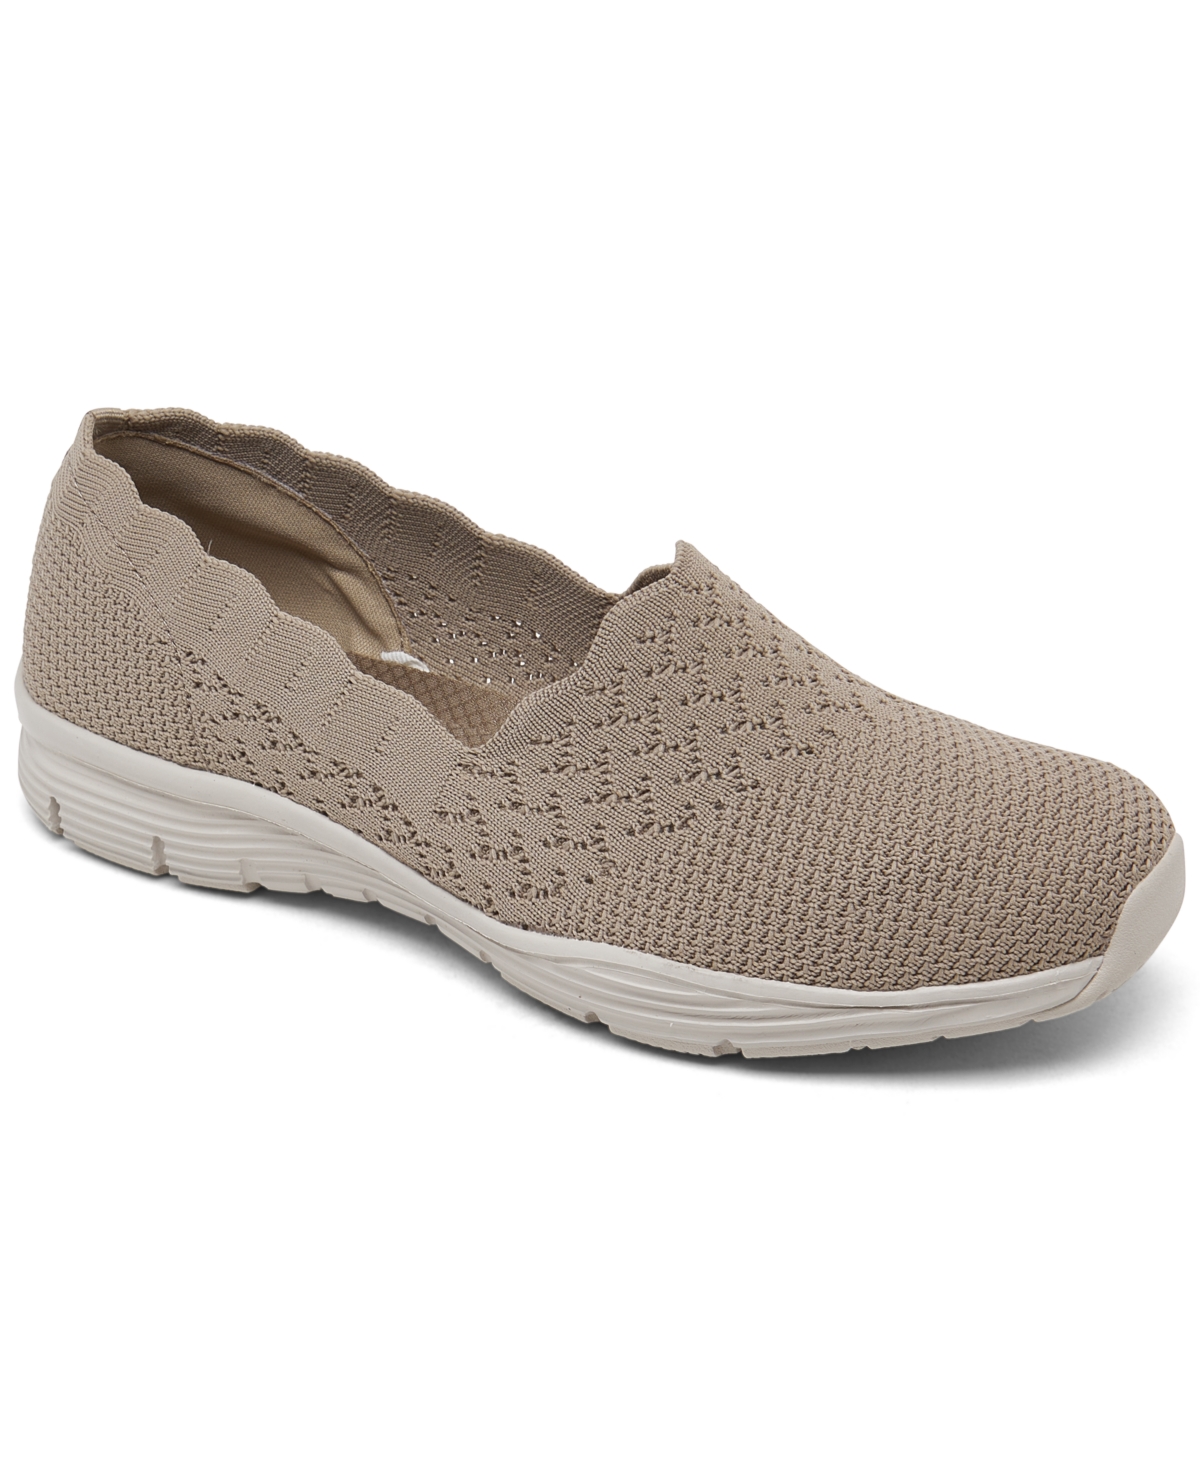 Skechers Wide Seager - Stat Slip-on Wide Width Casual Sneakers From Finish Line In Taupe